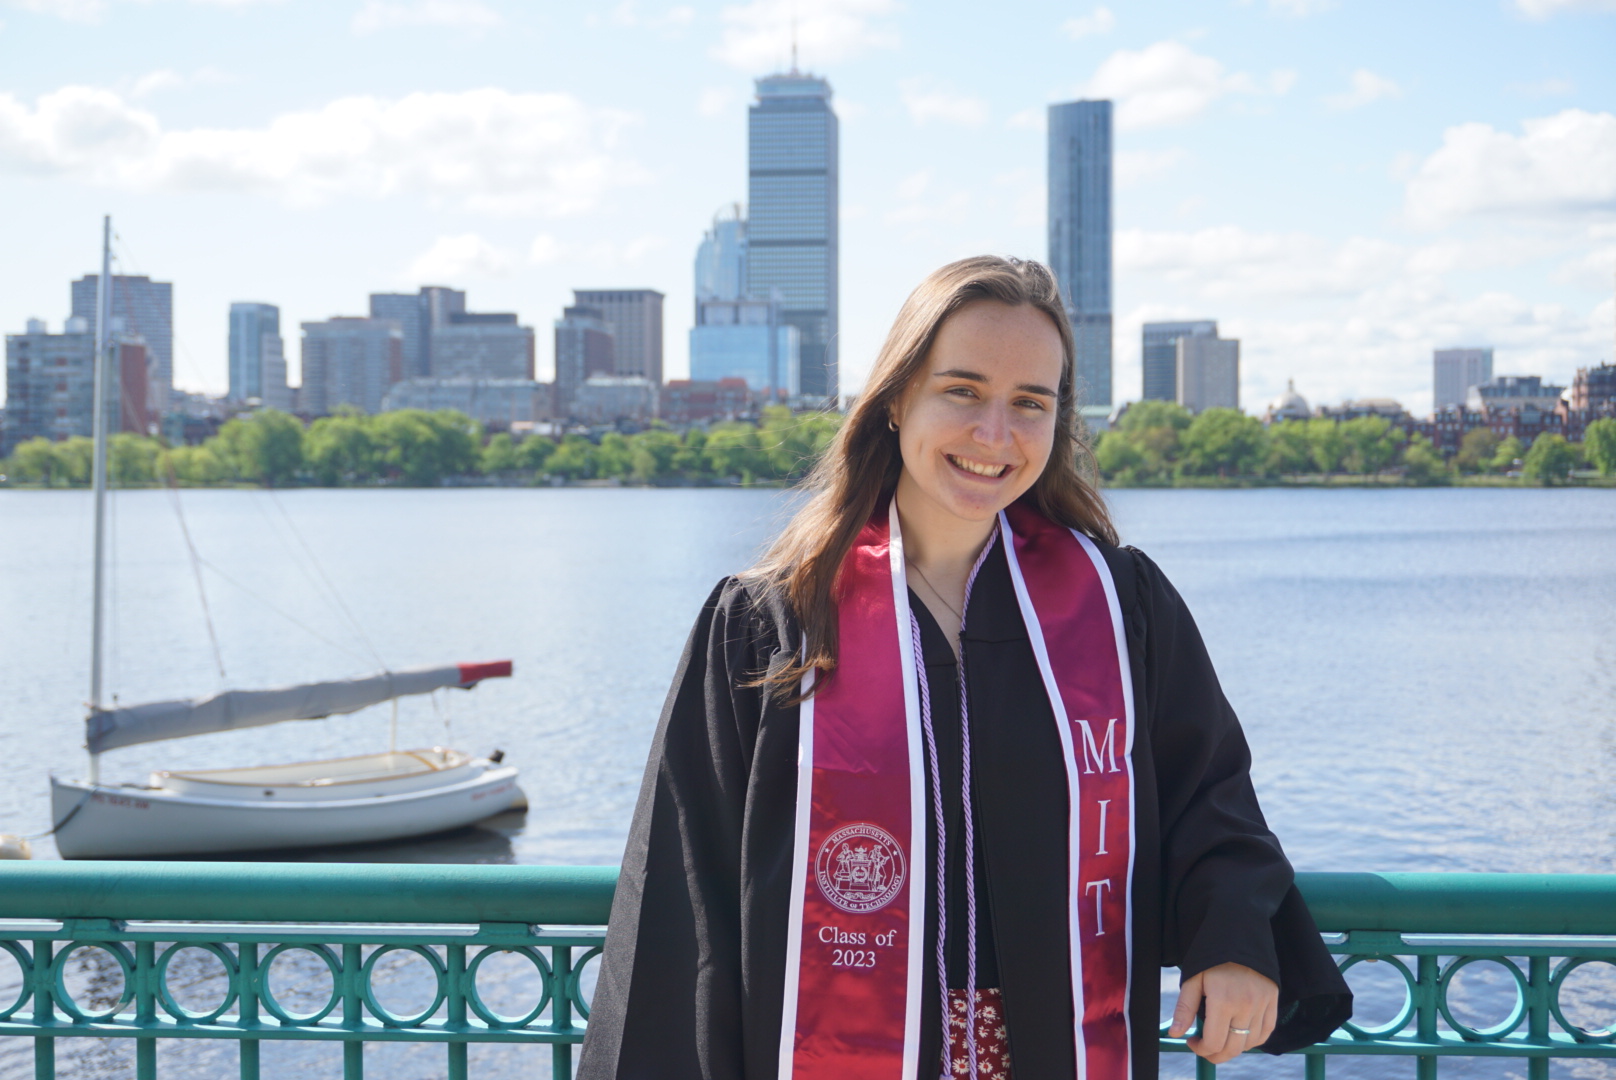 Recent MIT graduate Dahlia Dry '23, expanded her research in water monitoring through the MCSC's Climate & Sustainability Scholars Program.